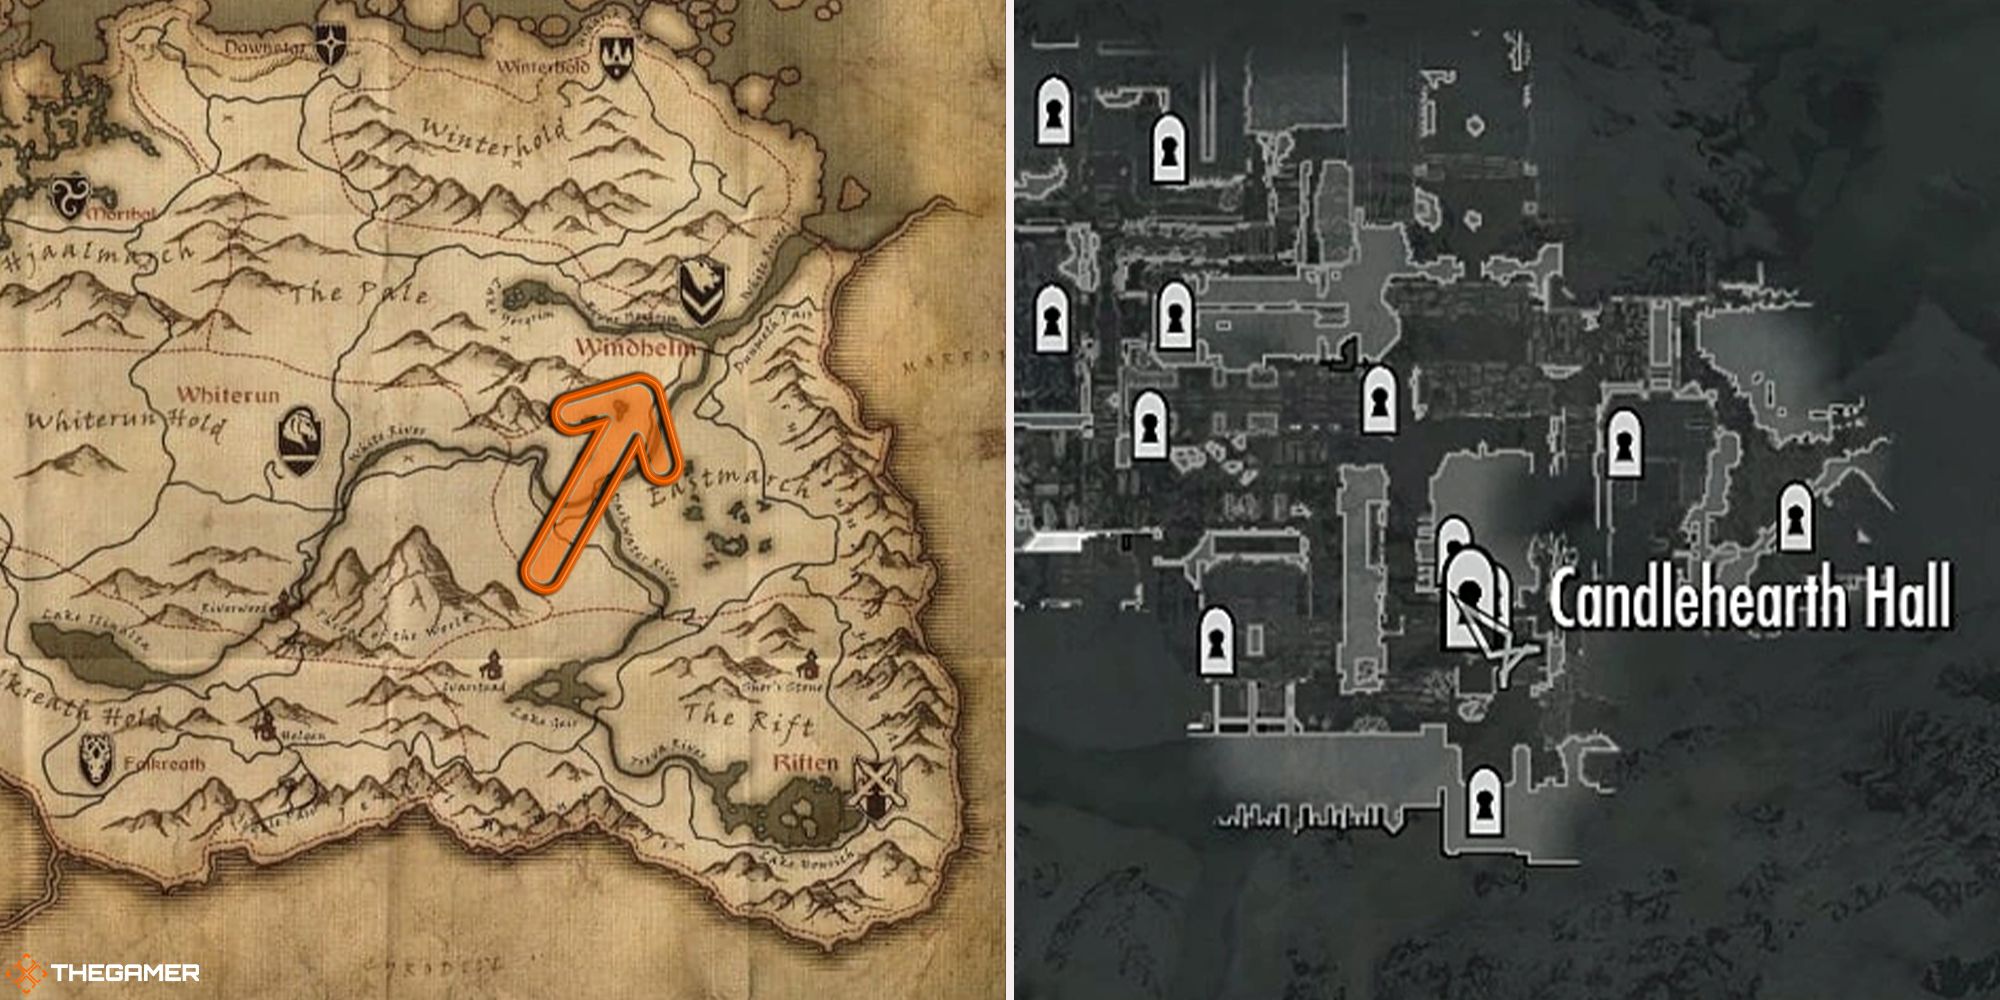 Skyrim - Stenvar's location in Windhelm at the Candlehearth Hall